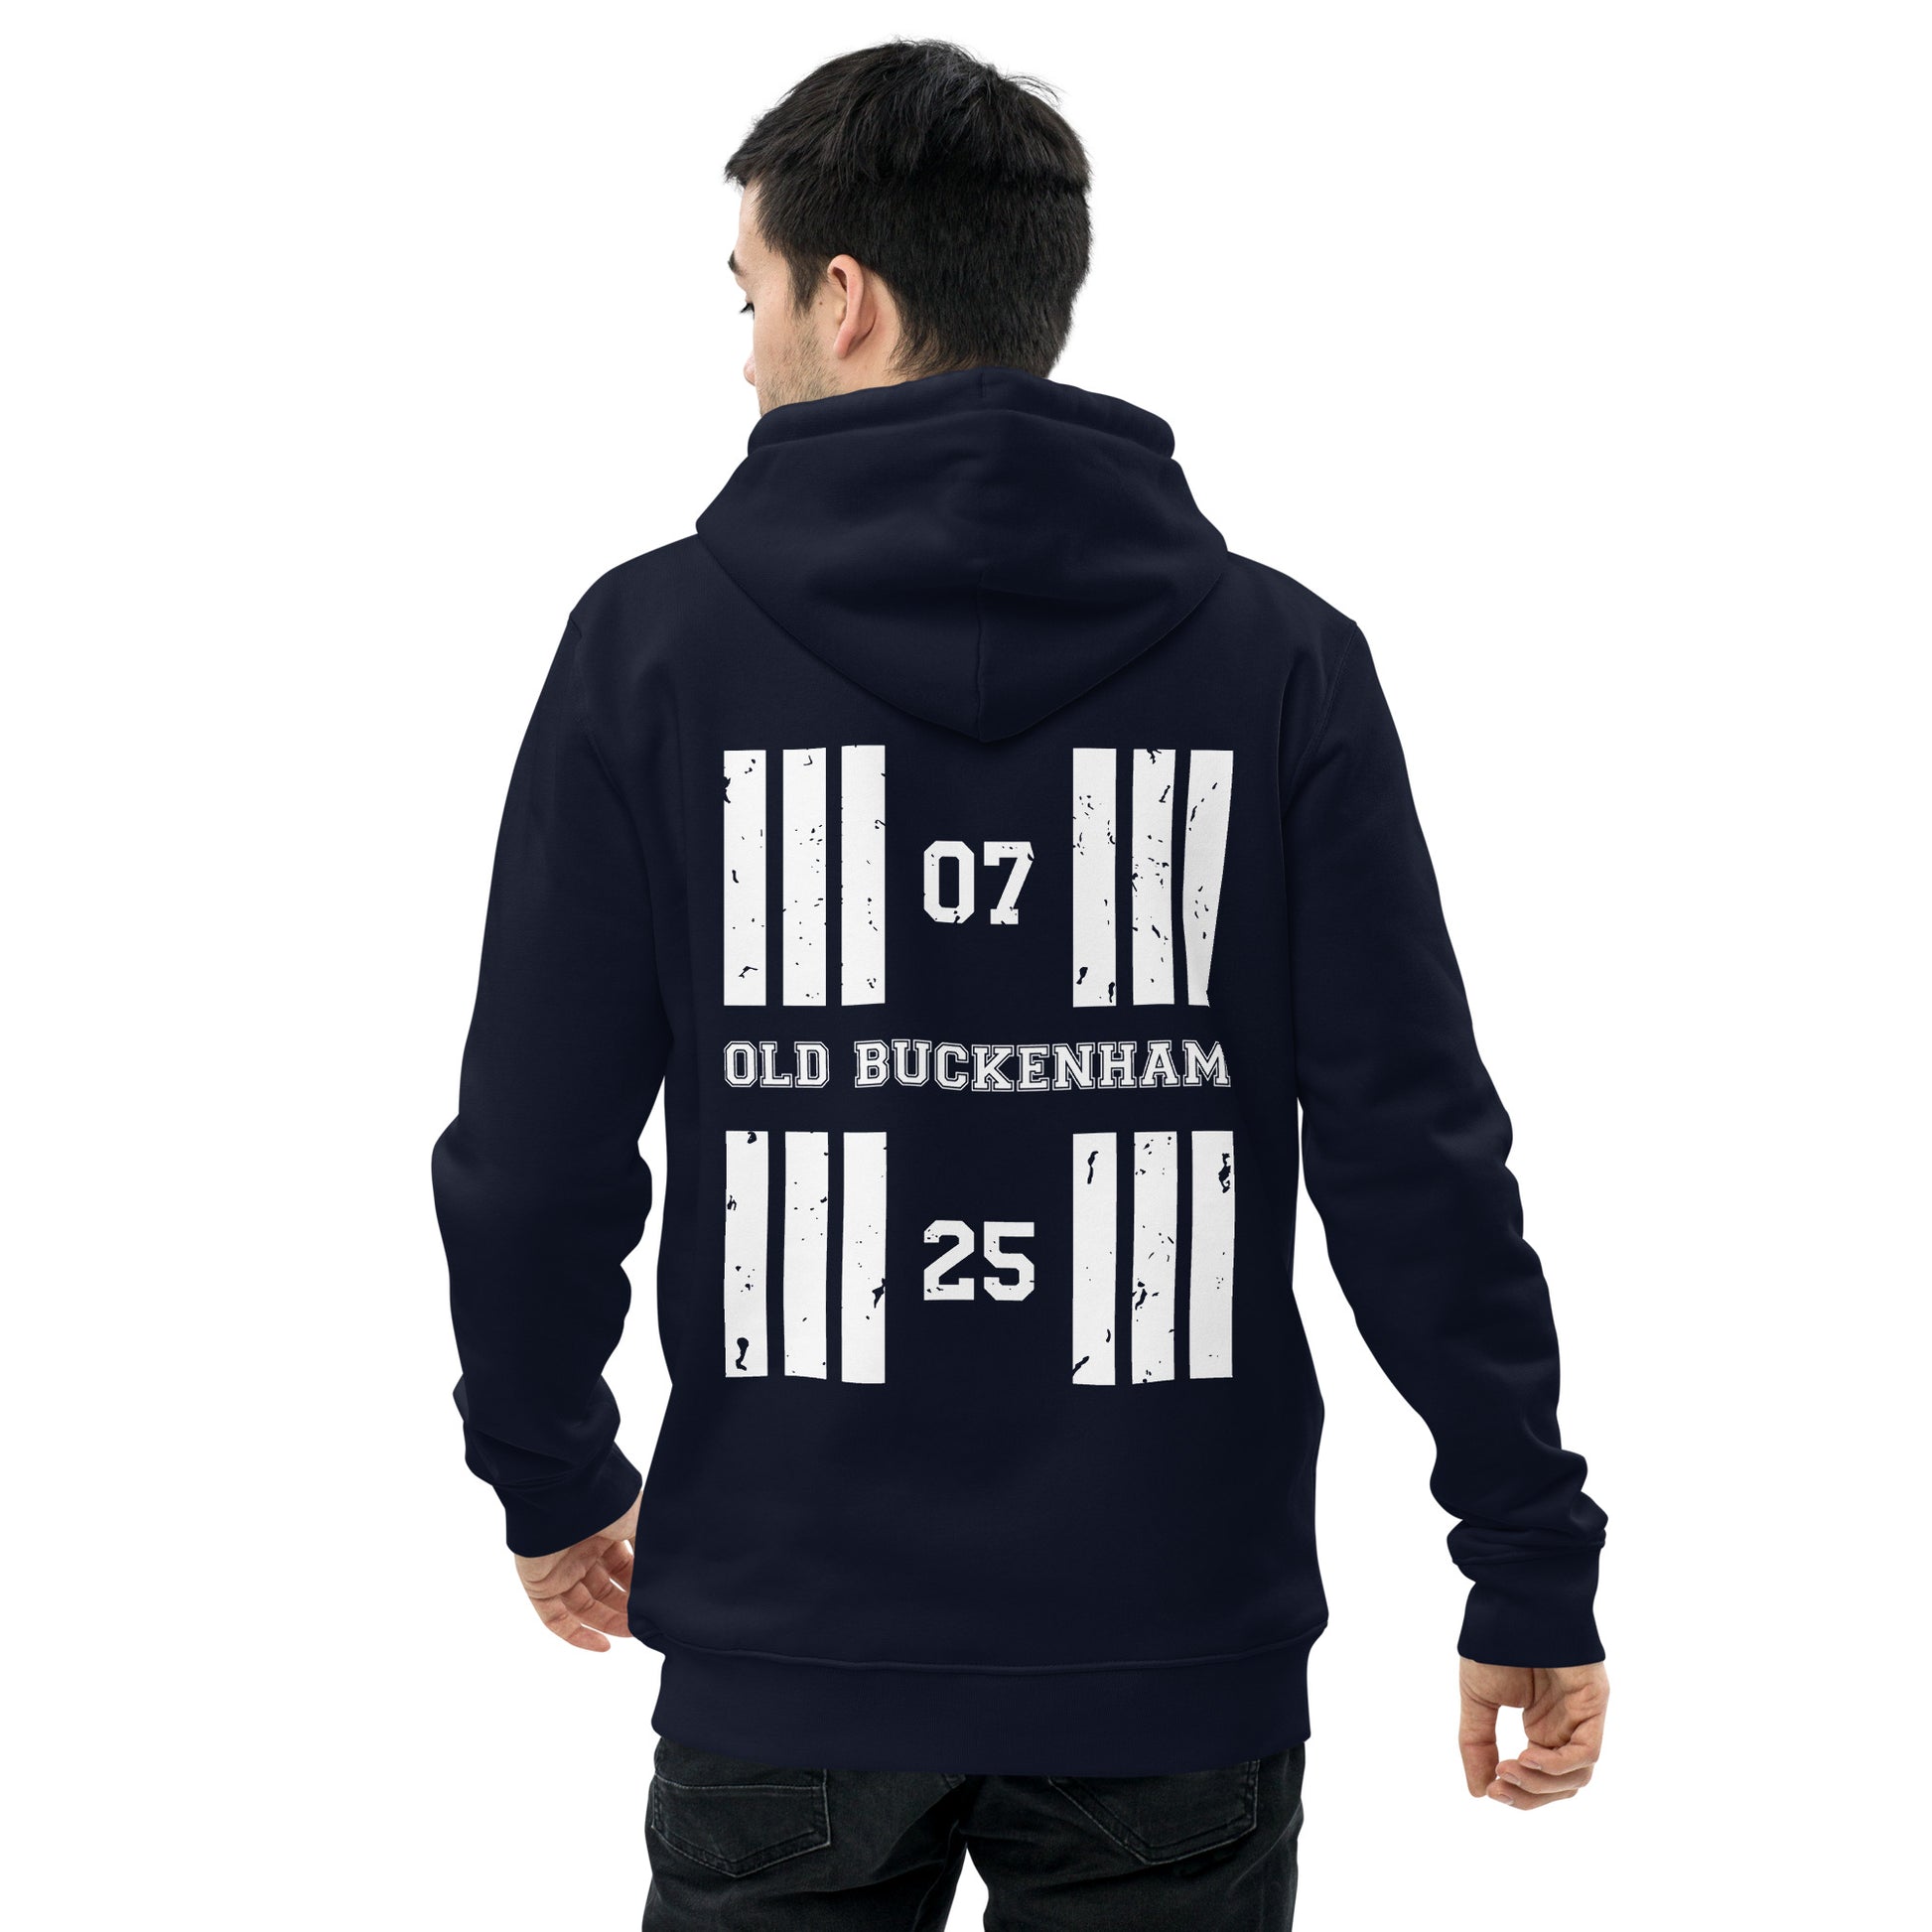 Coloured in navy the Old Buckenham Airfield Designator heavyweight hoodie features a discreet collegiate print on the front with a bold print featuring the airport's name and designator, framed by stylised distressed threshold markings on the back.